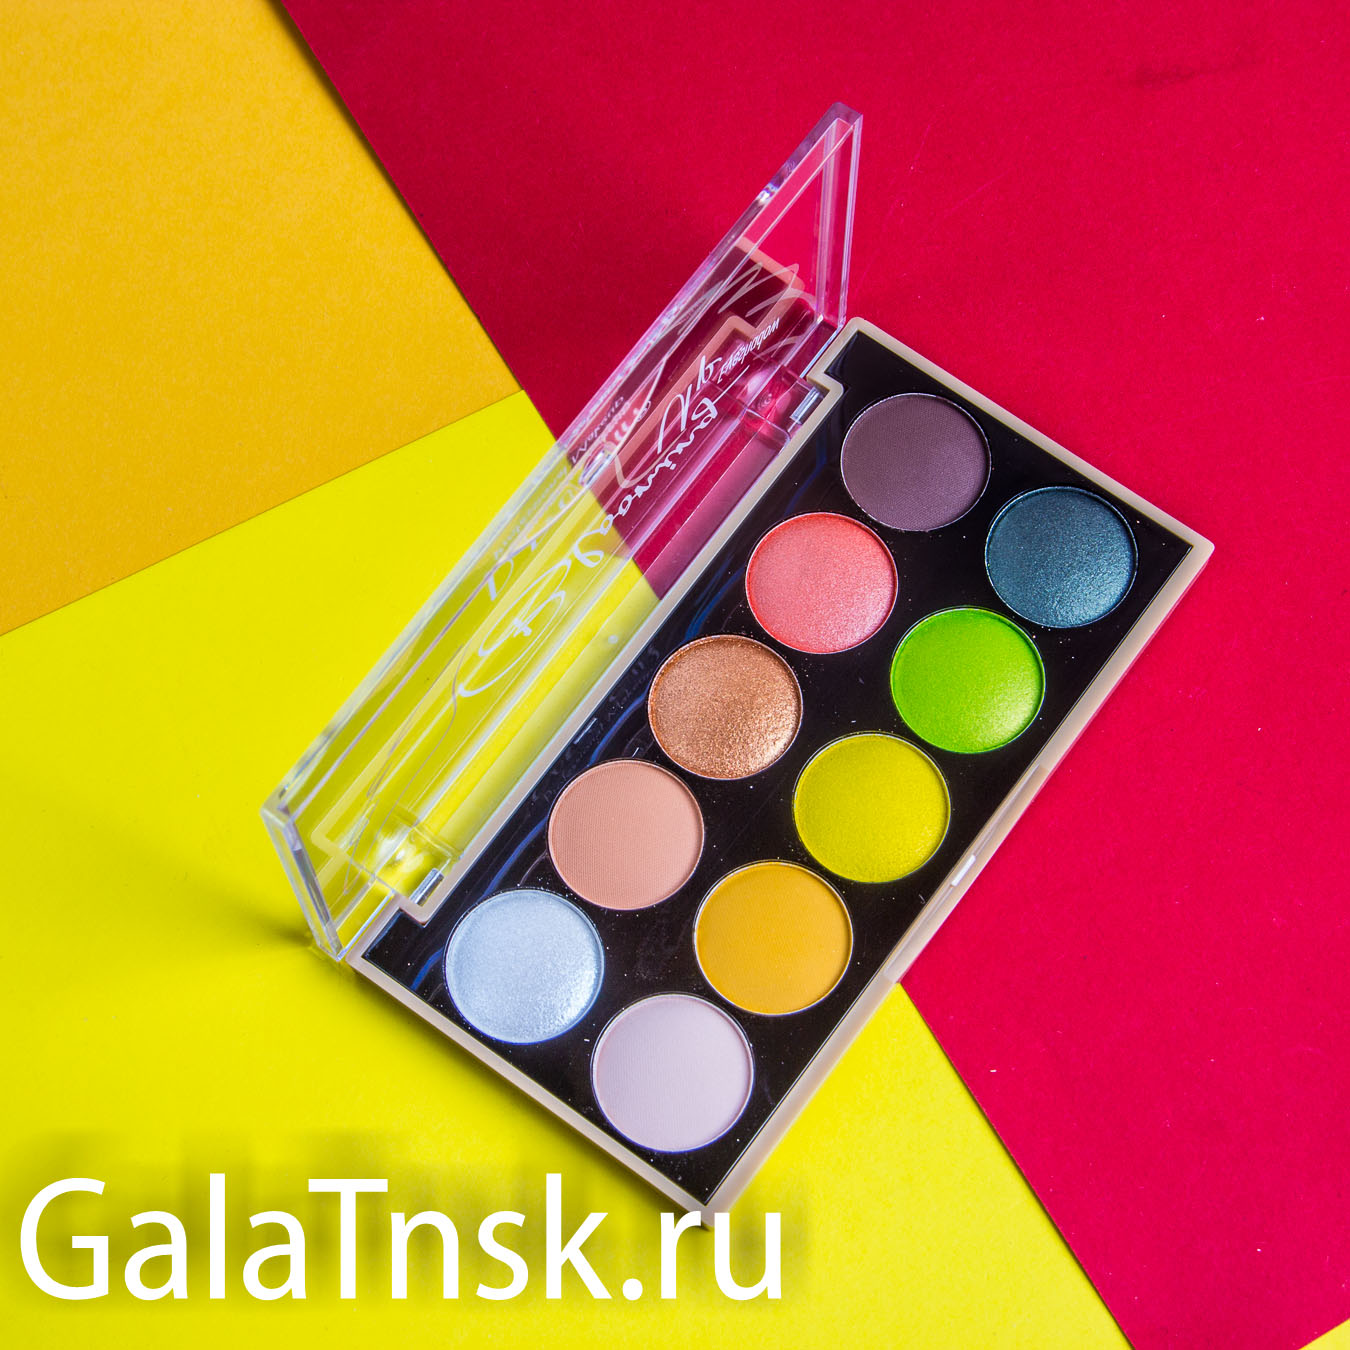 DO DO GIPL Тени BLOOMING UP 10colors D3251 01